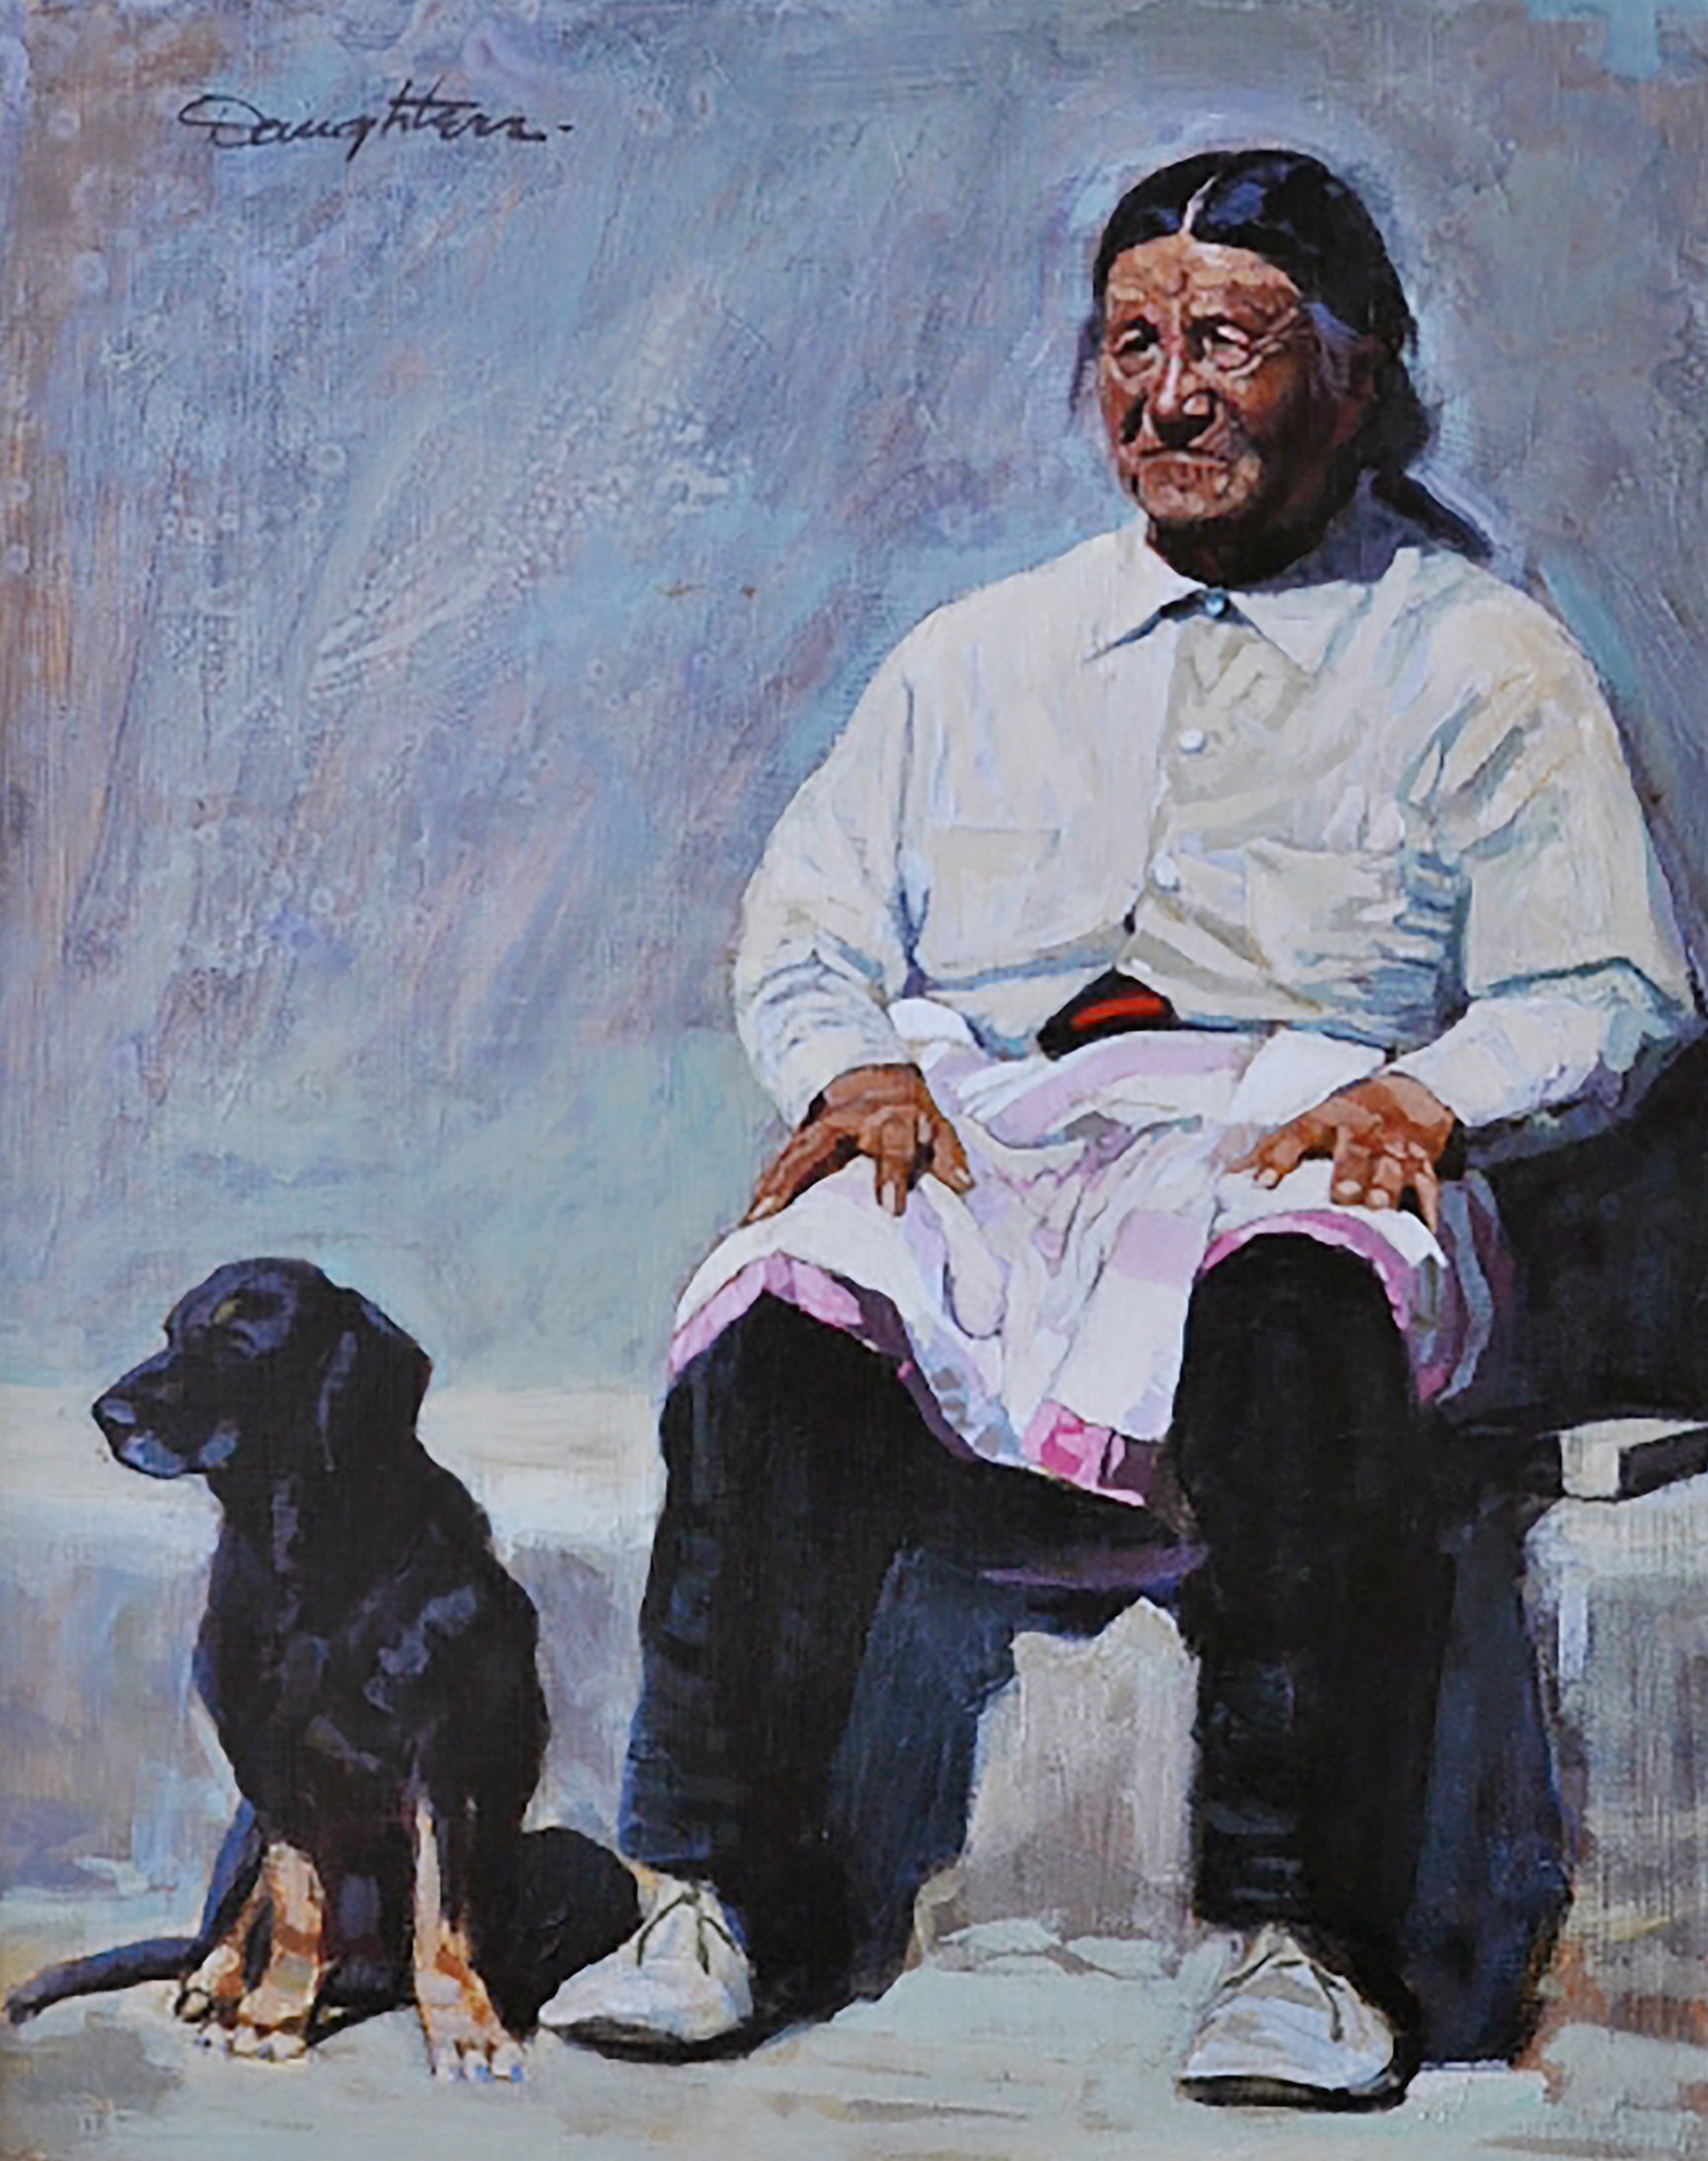 His Dog by Robert Daughters (1929-2013)